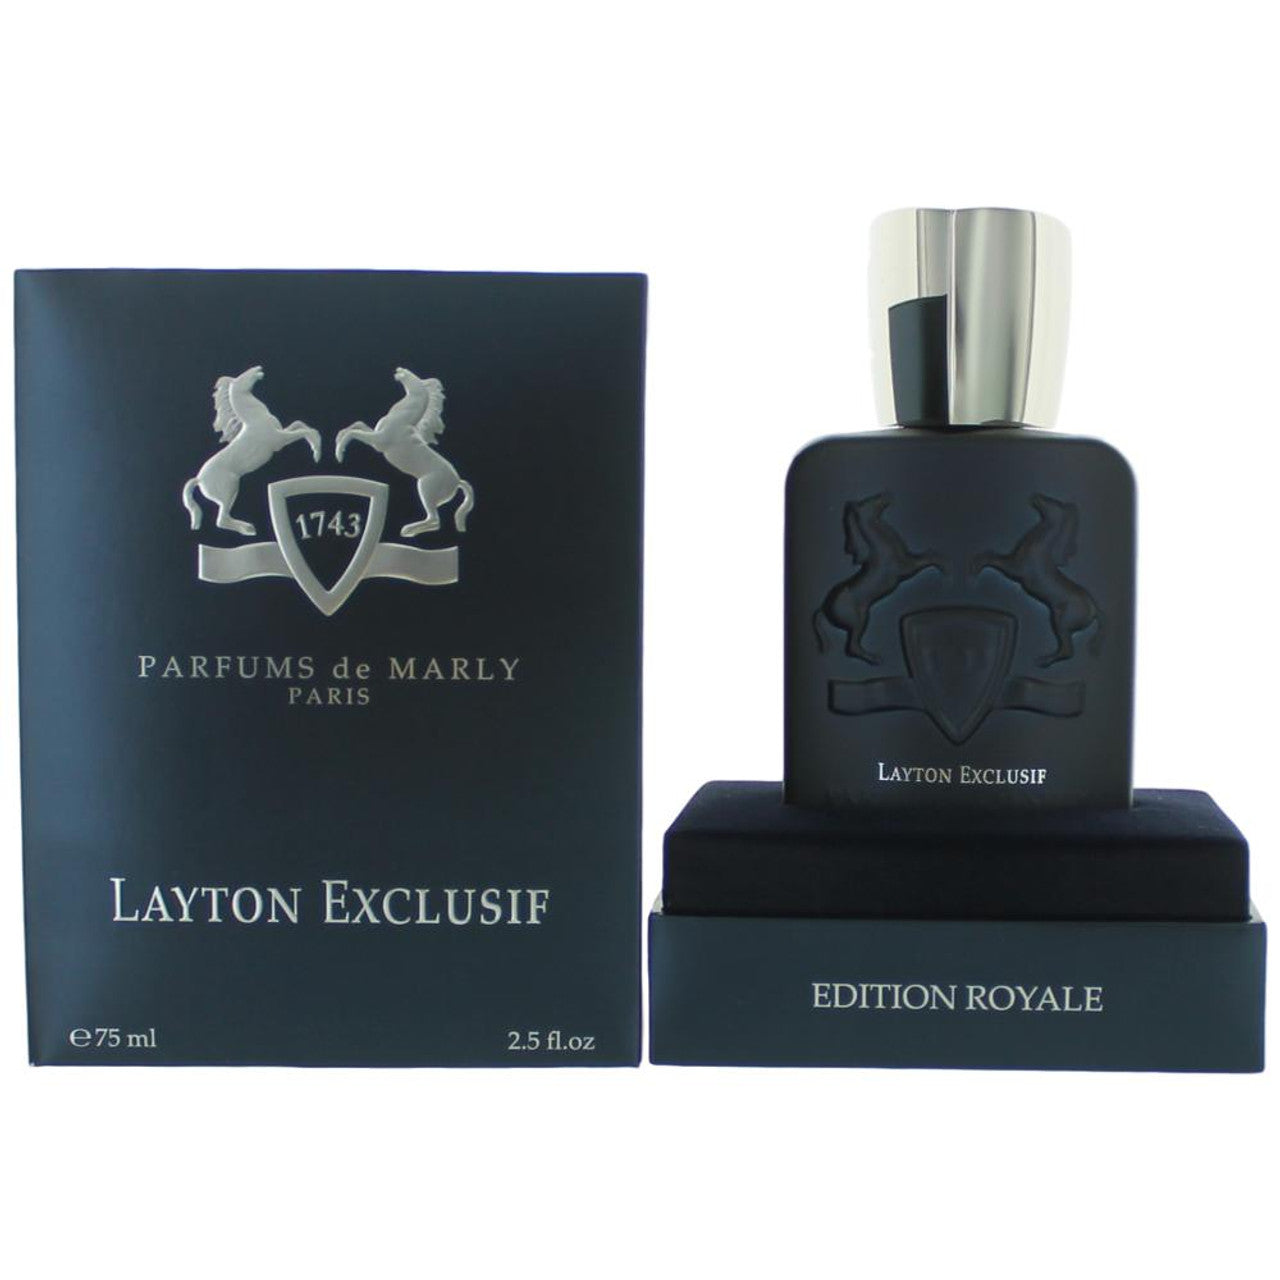 2.5 oz blue bottle and packaging for parfums de marly layton exclusif 